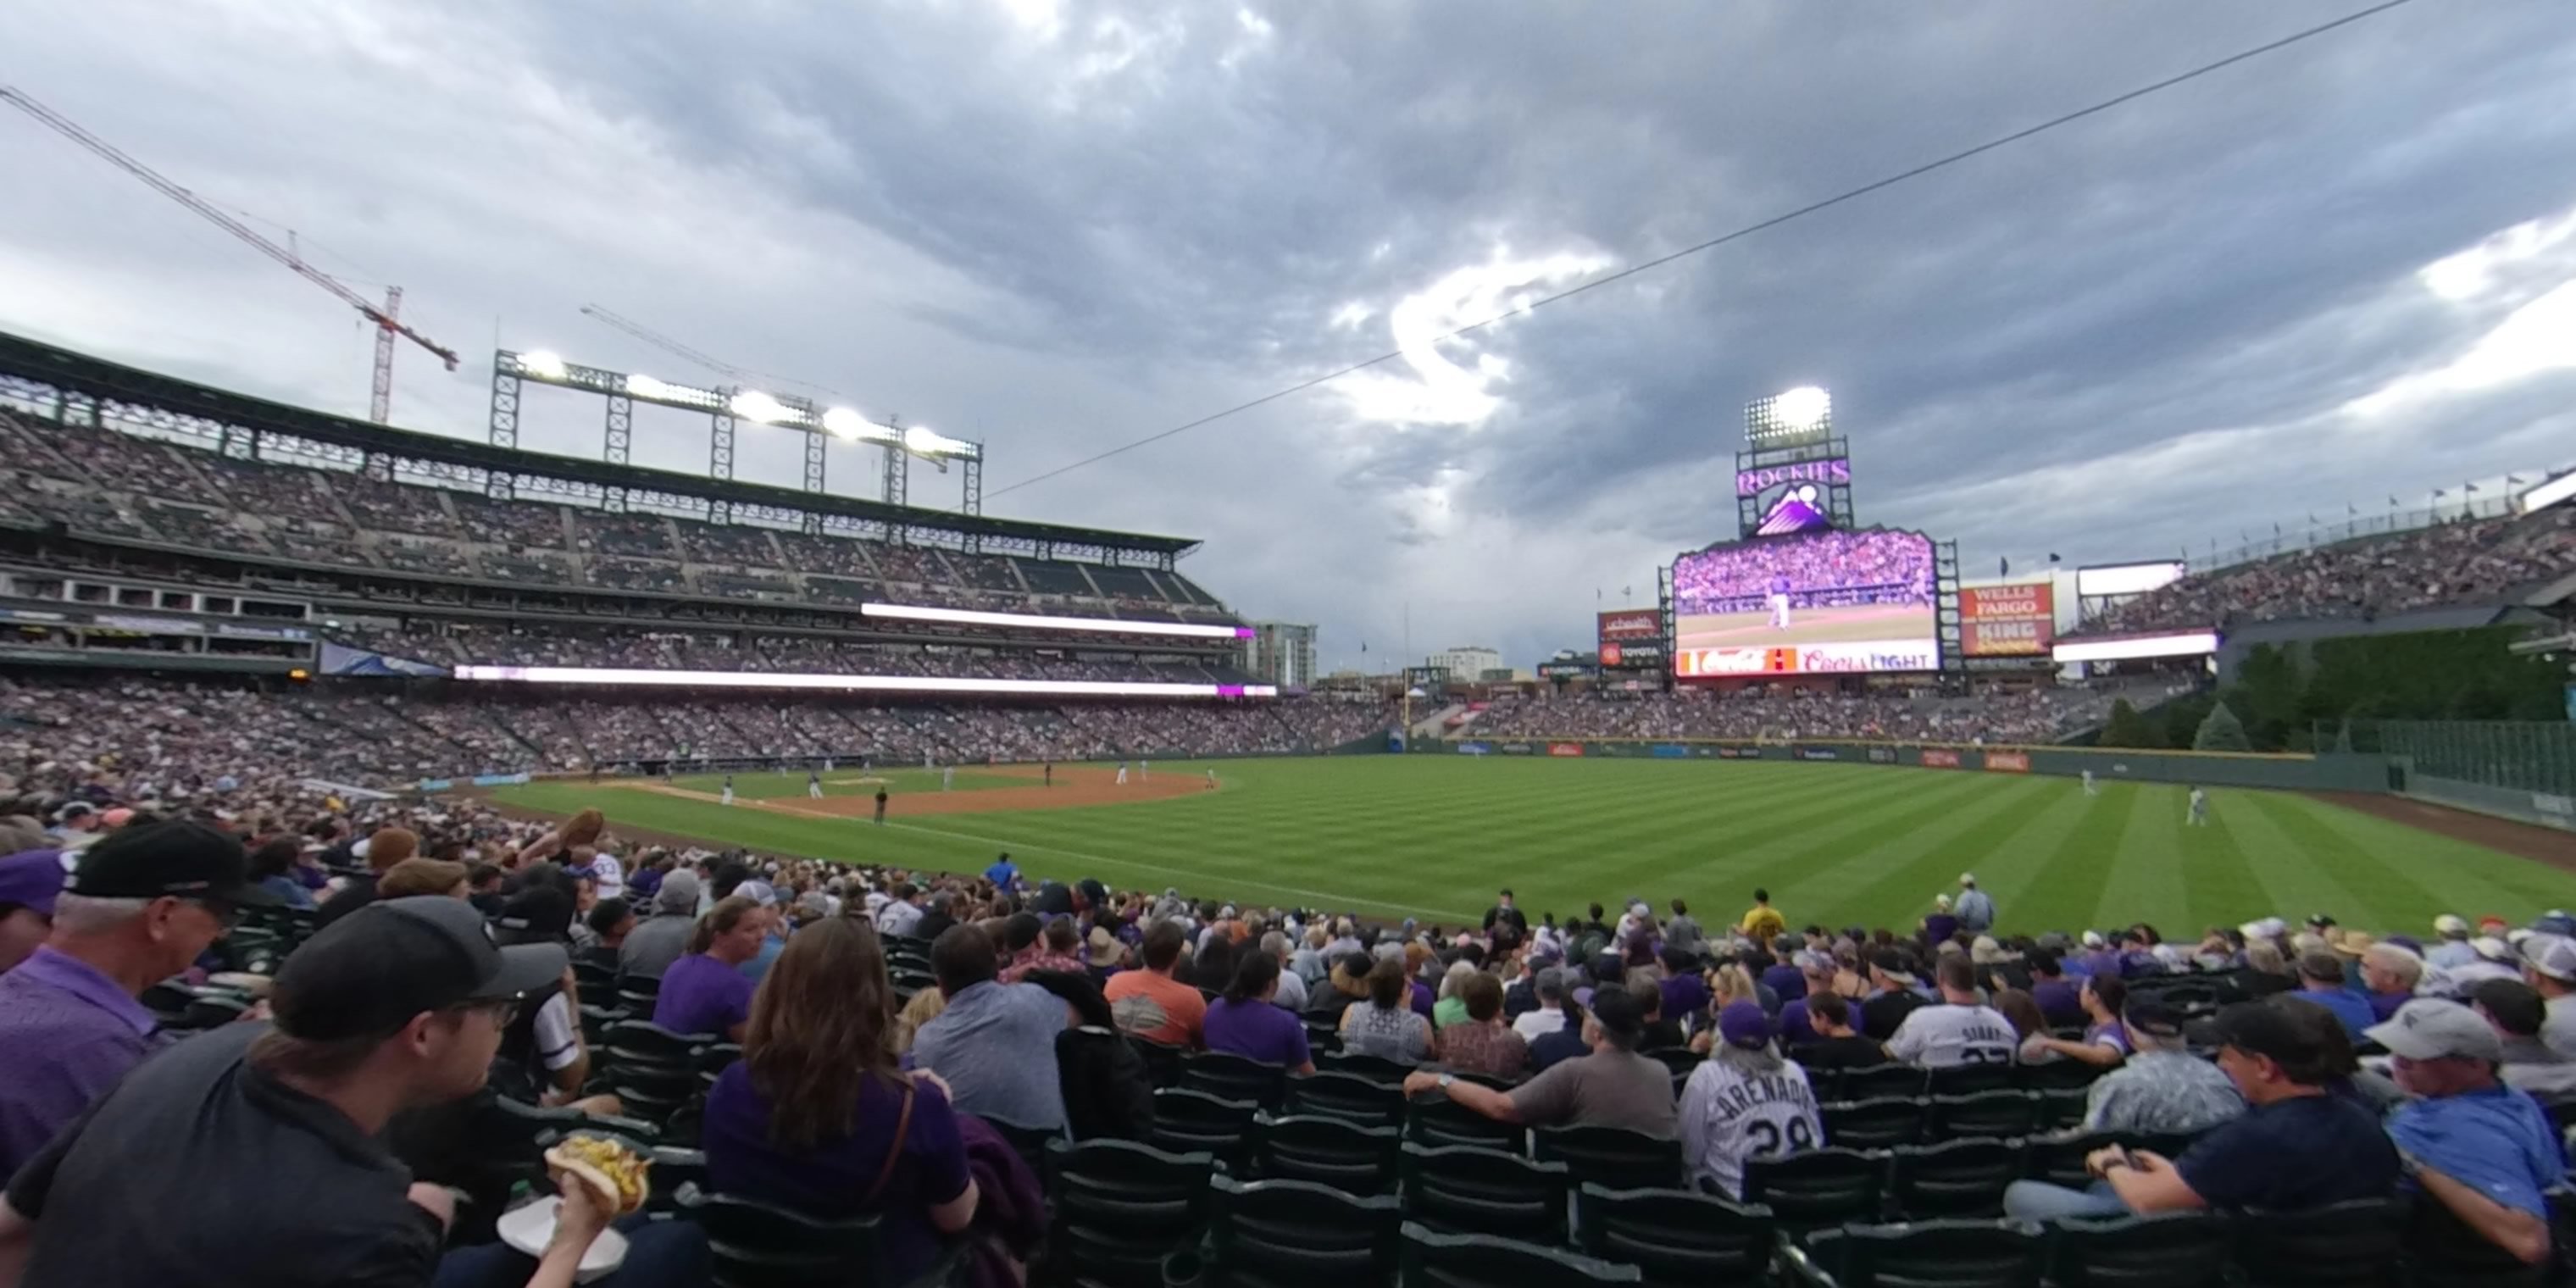 Section 115 at Coors Field 